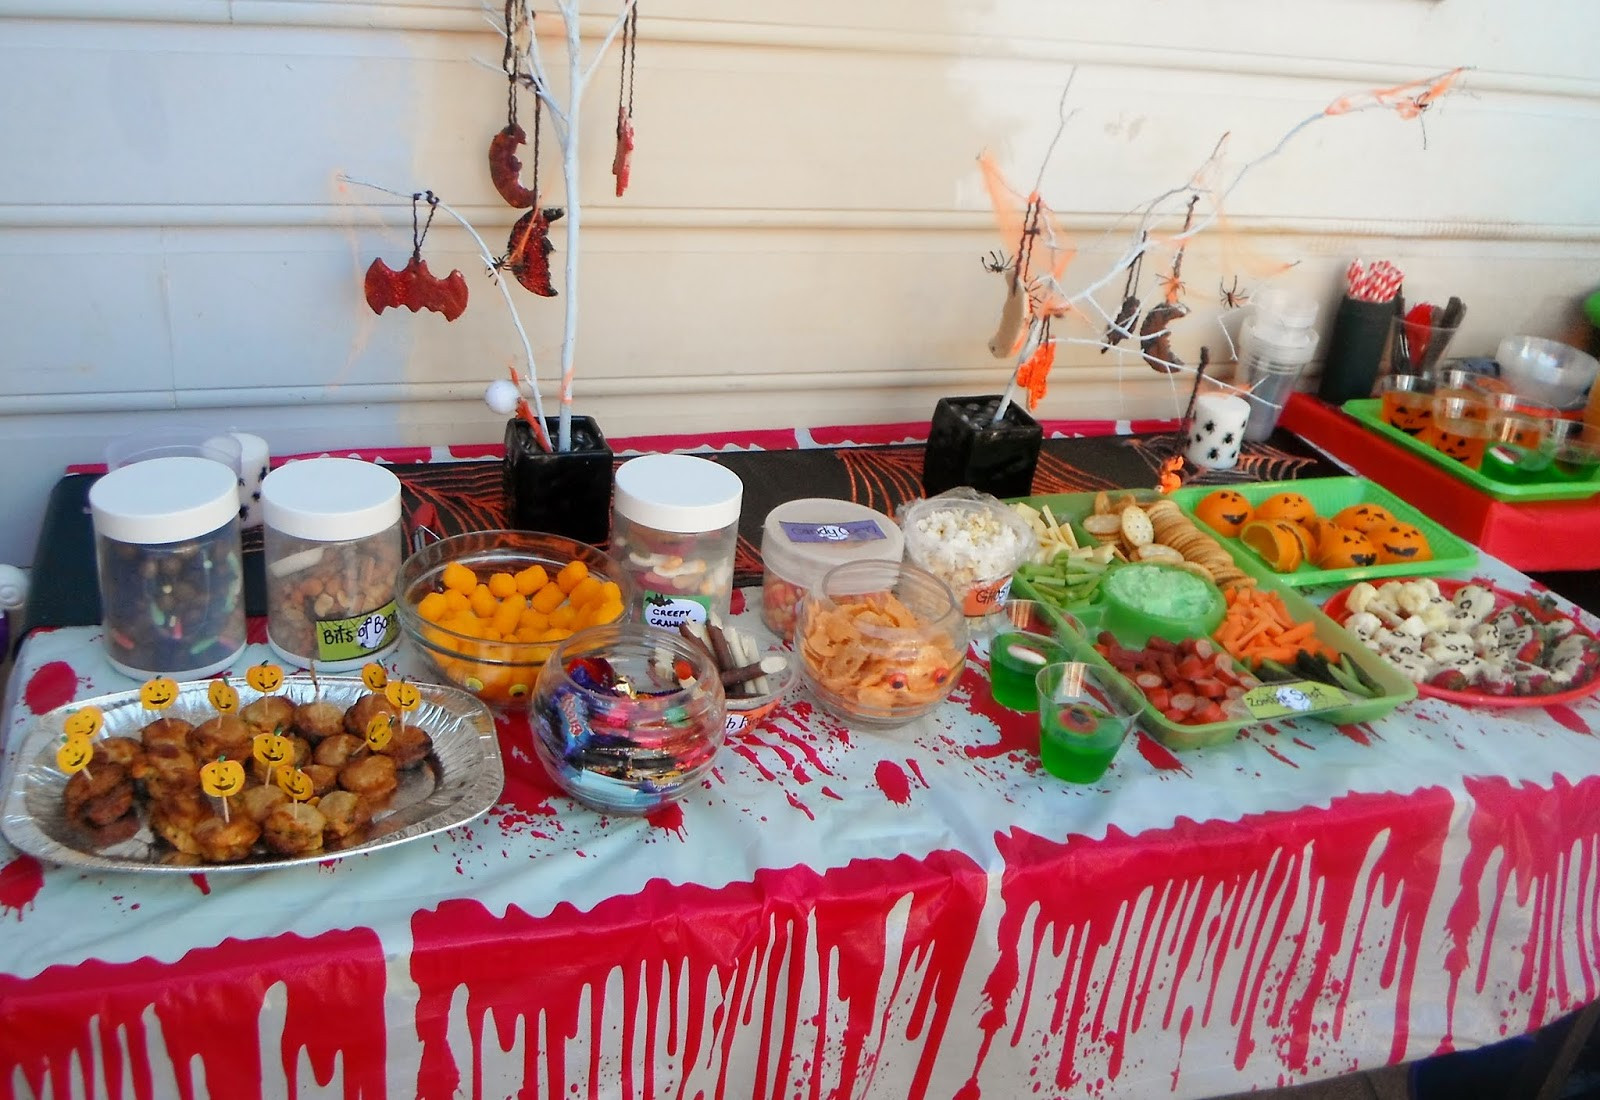 Halloween Party Treats Ideas
 Adventures at home with Mum Halloween Party Food